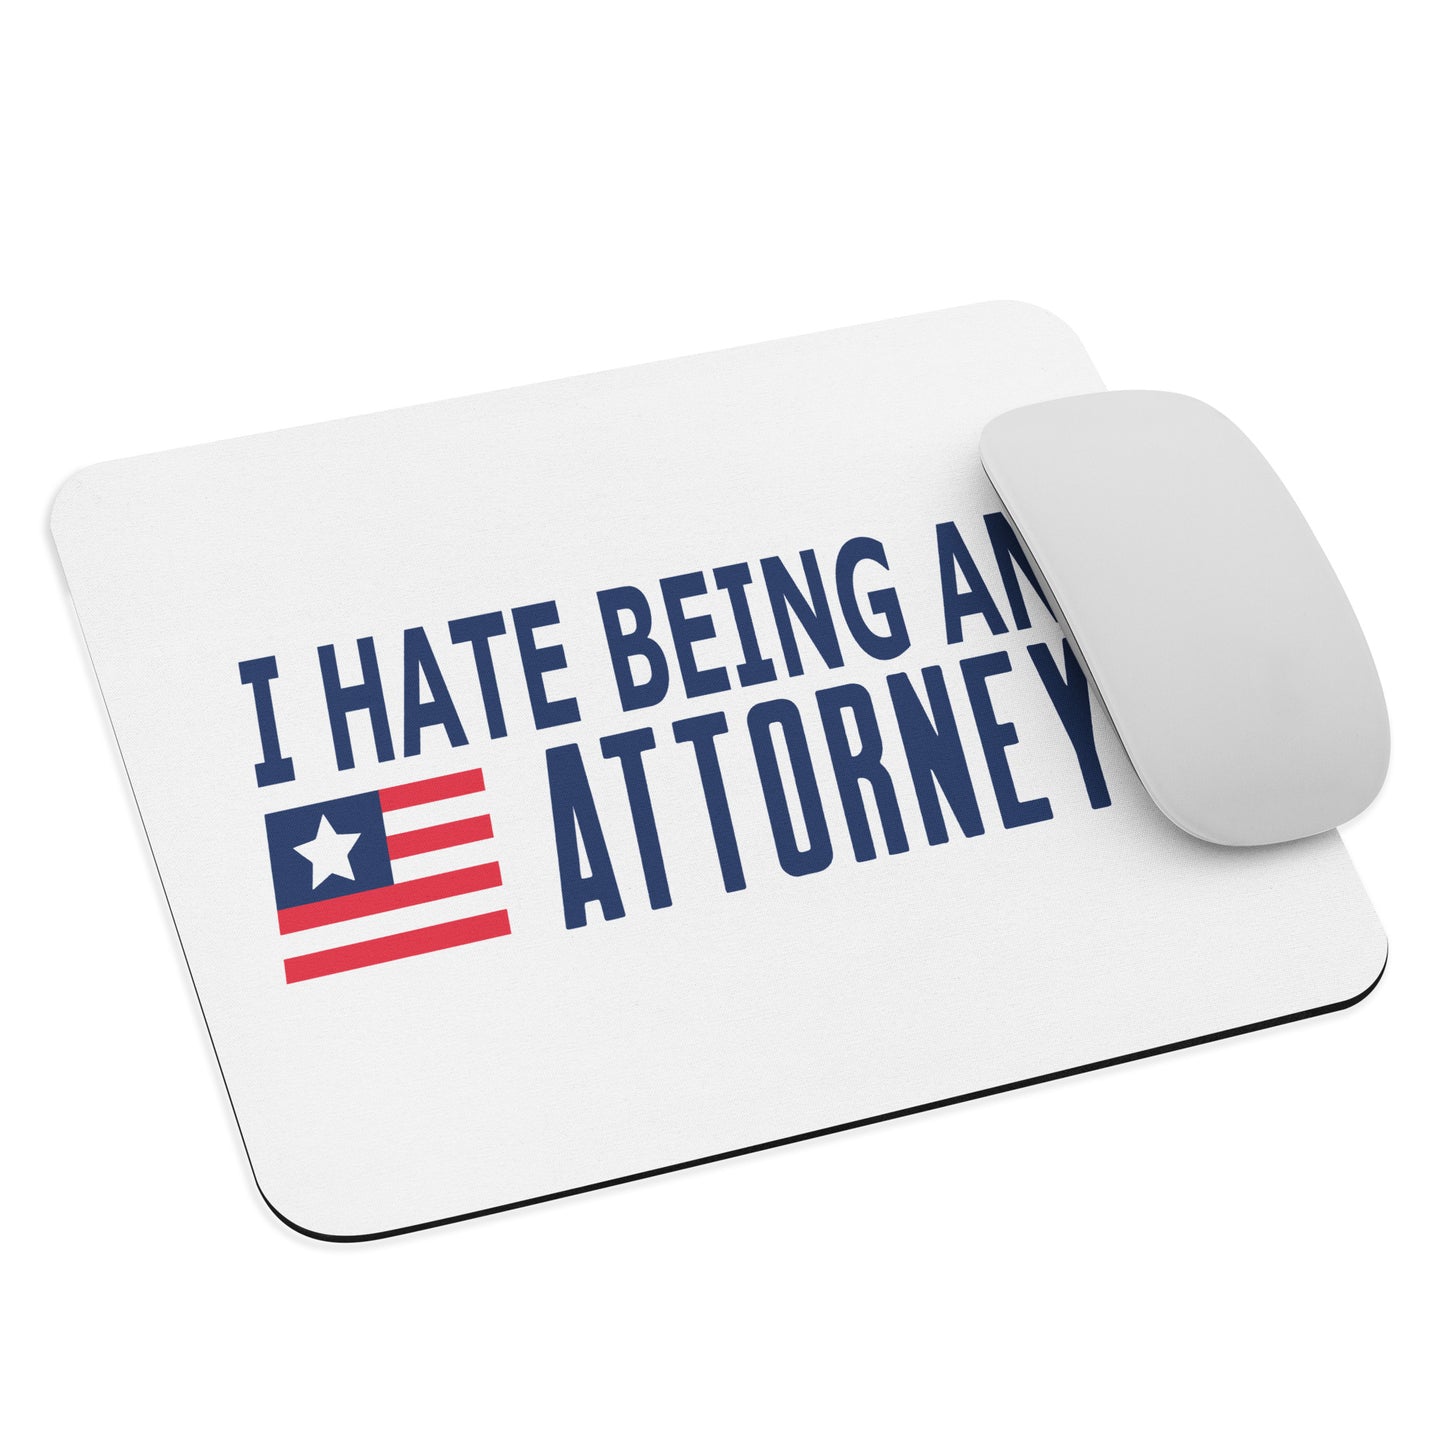 I Hate Being An Attorney Mouse pad